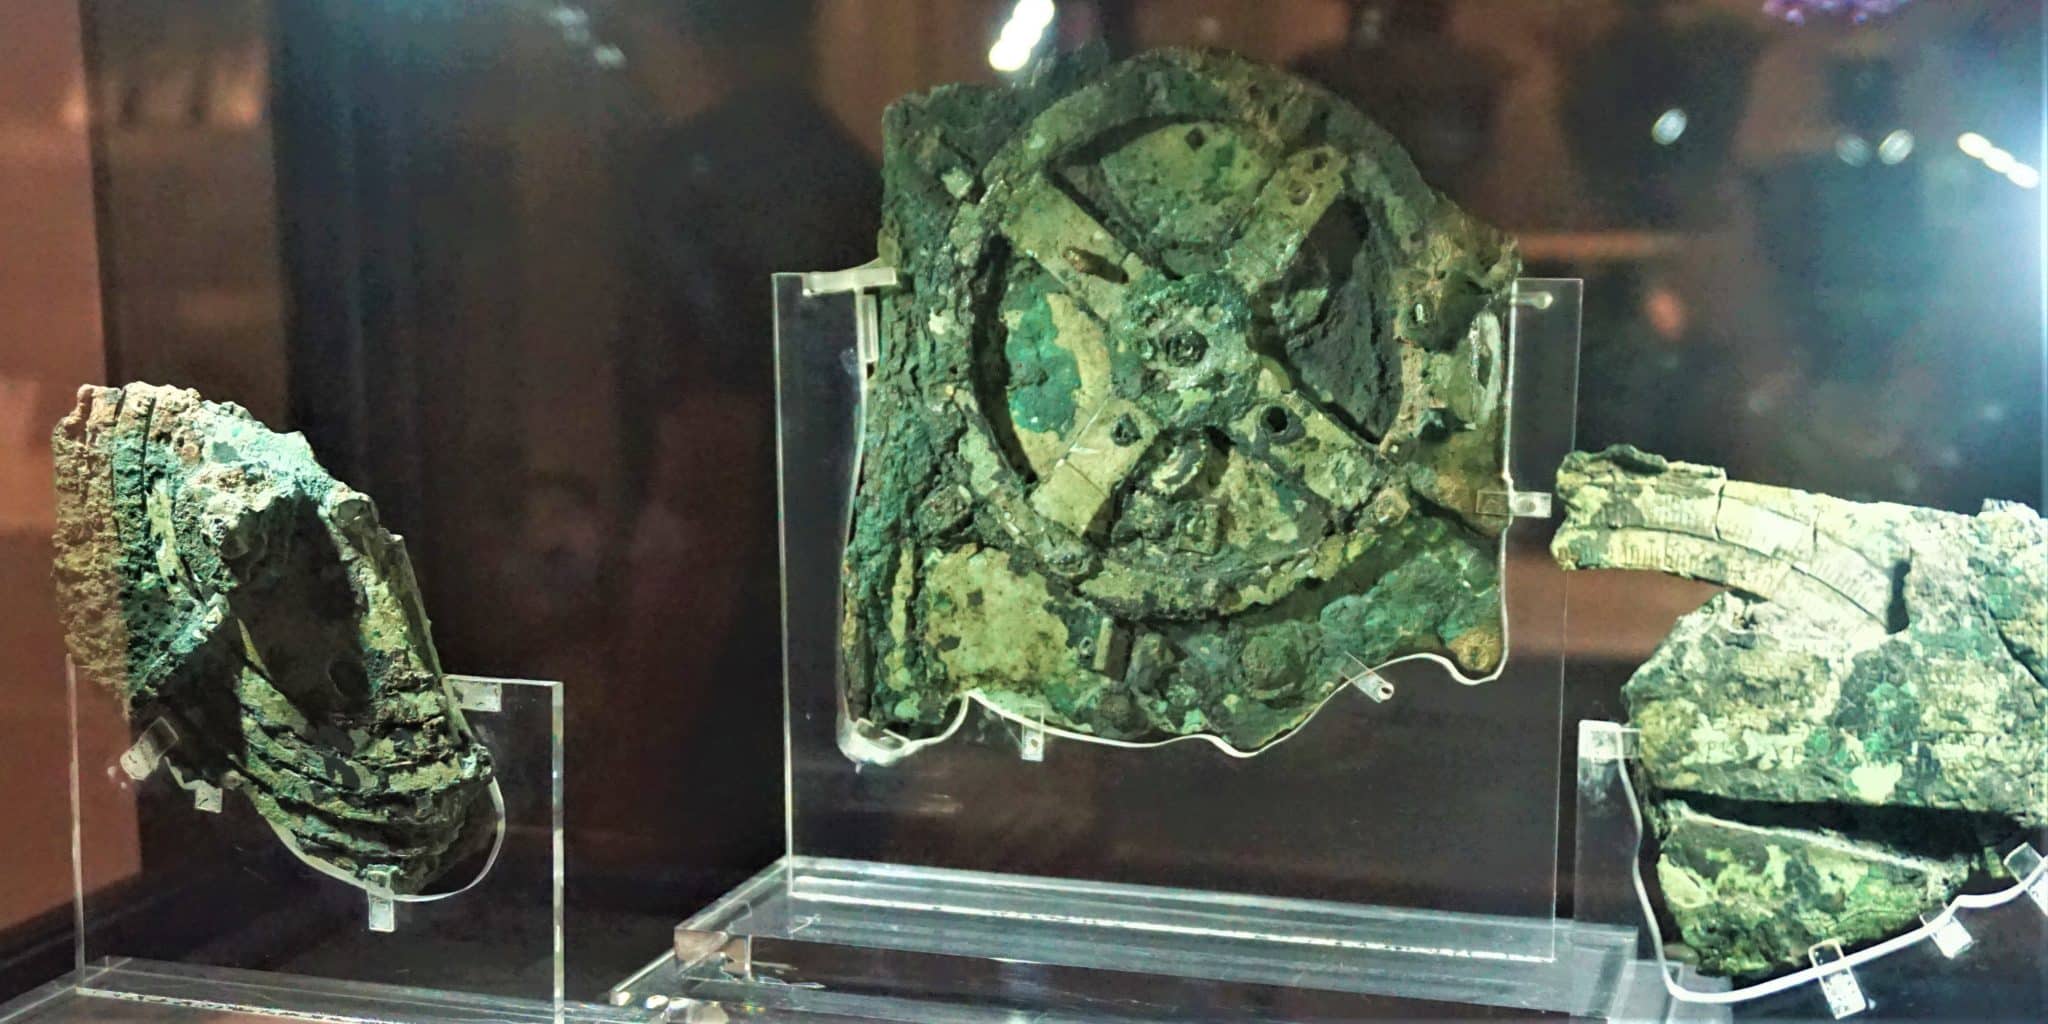 Antikythera Mechanism National Archaeological Museum Athens By Joy Of Museum (1)